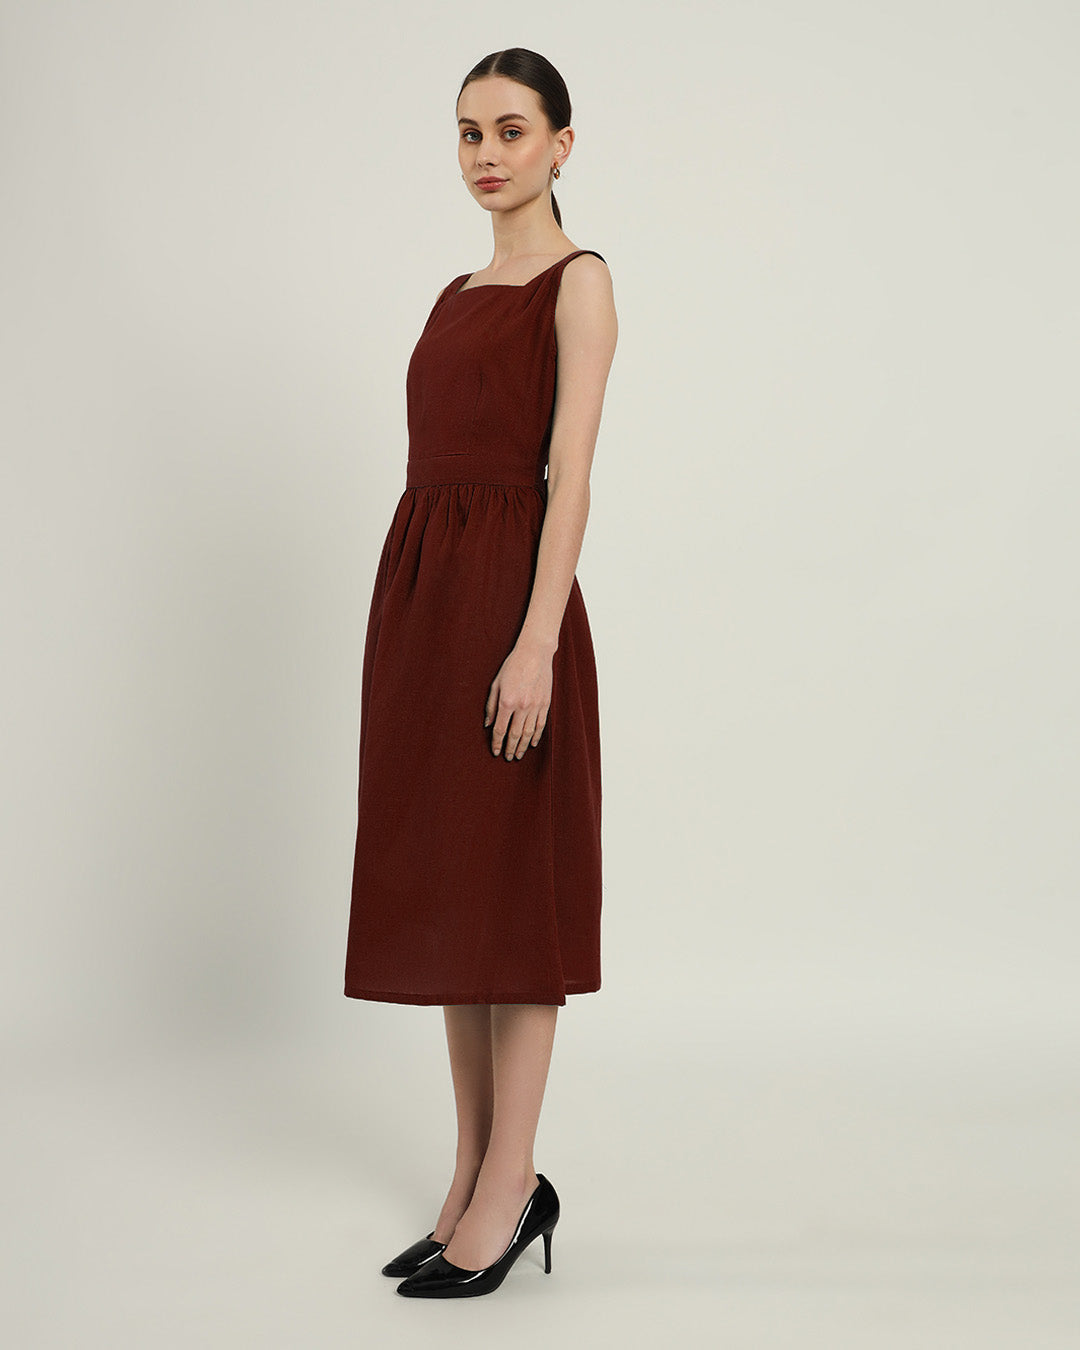 The Mihara Rouge Cotton Dress